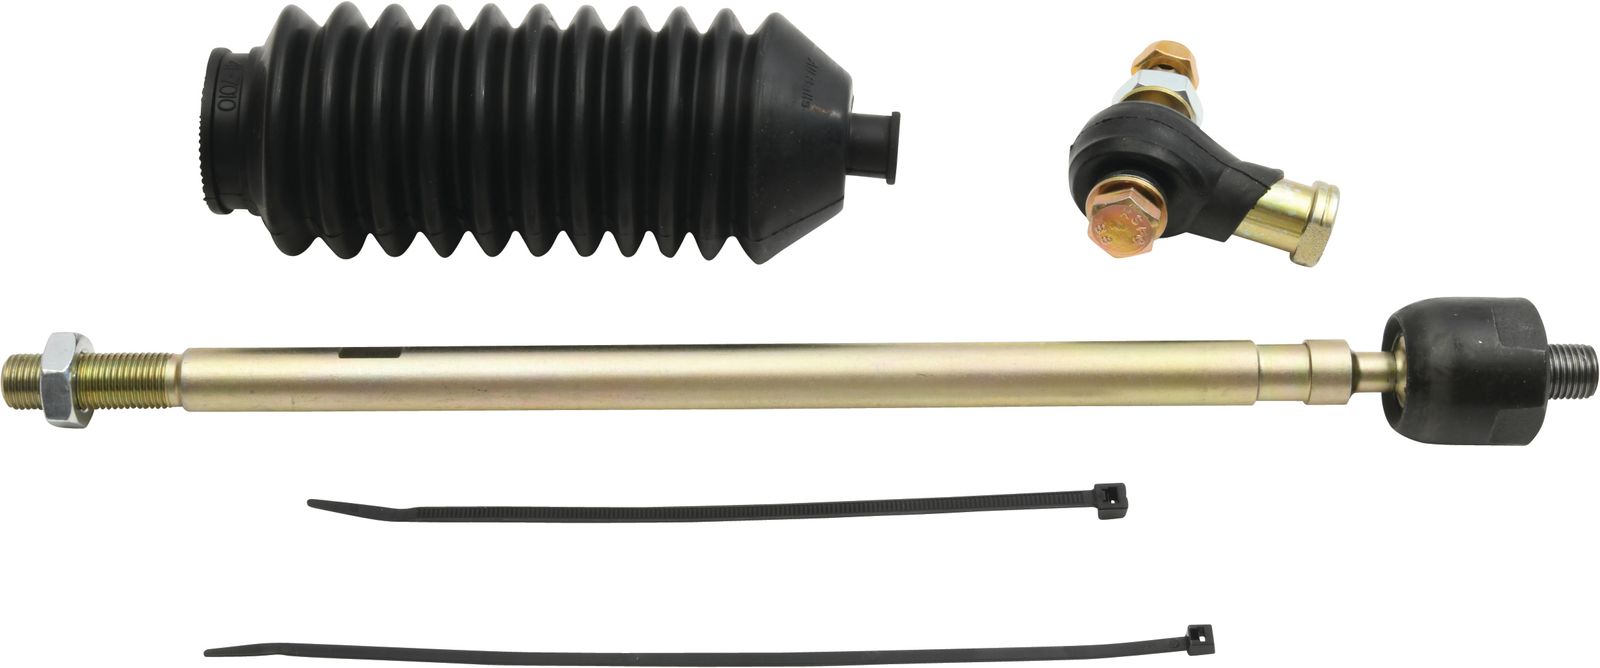 Wrp Tie Rod Ends - WRP511107-R image